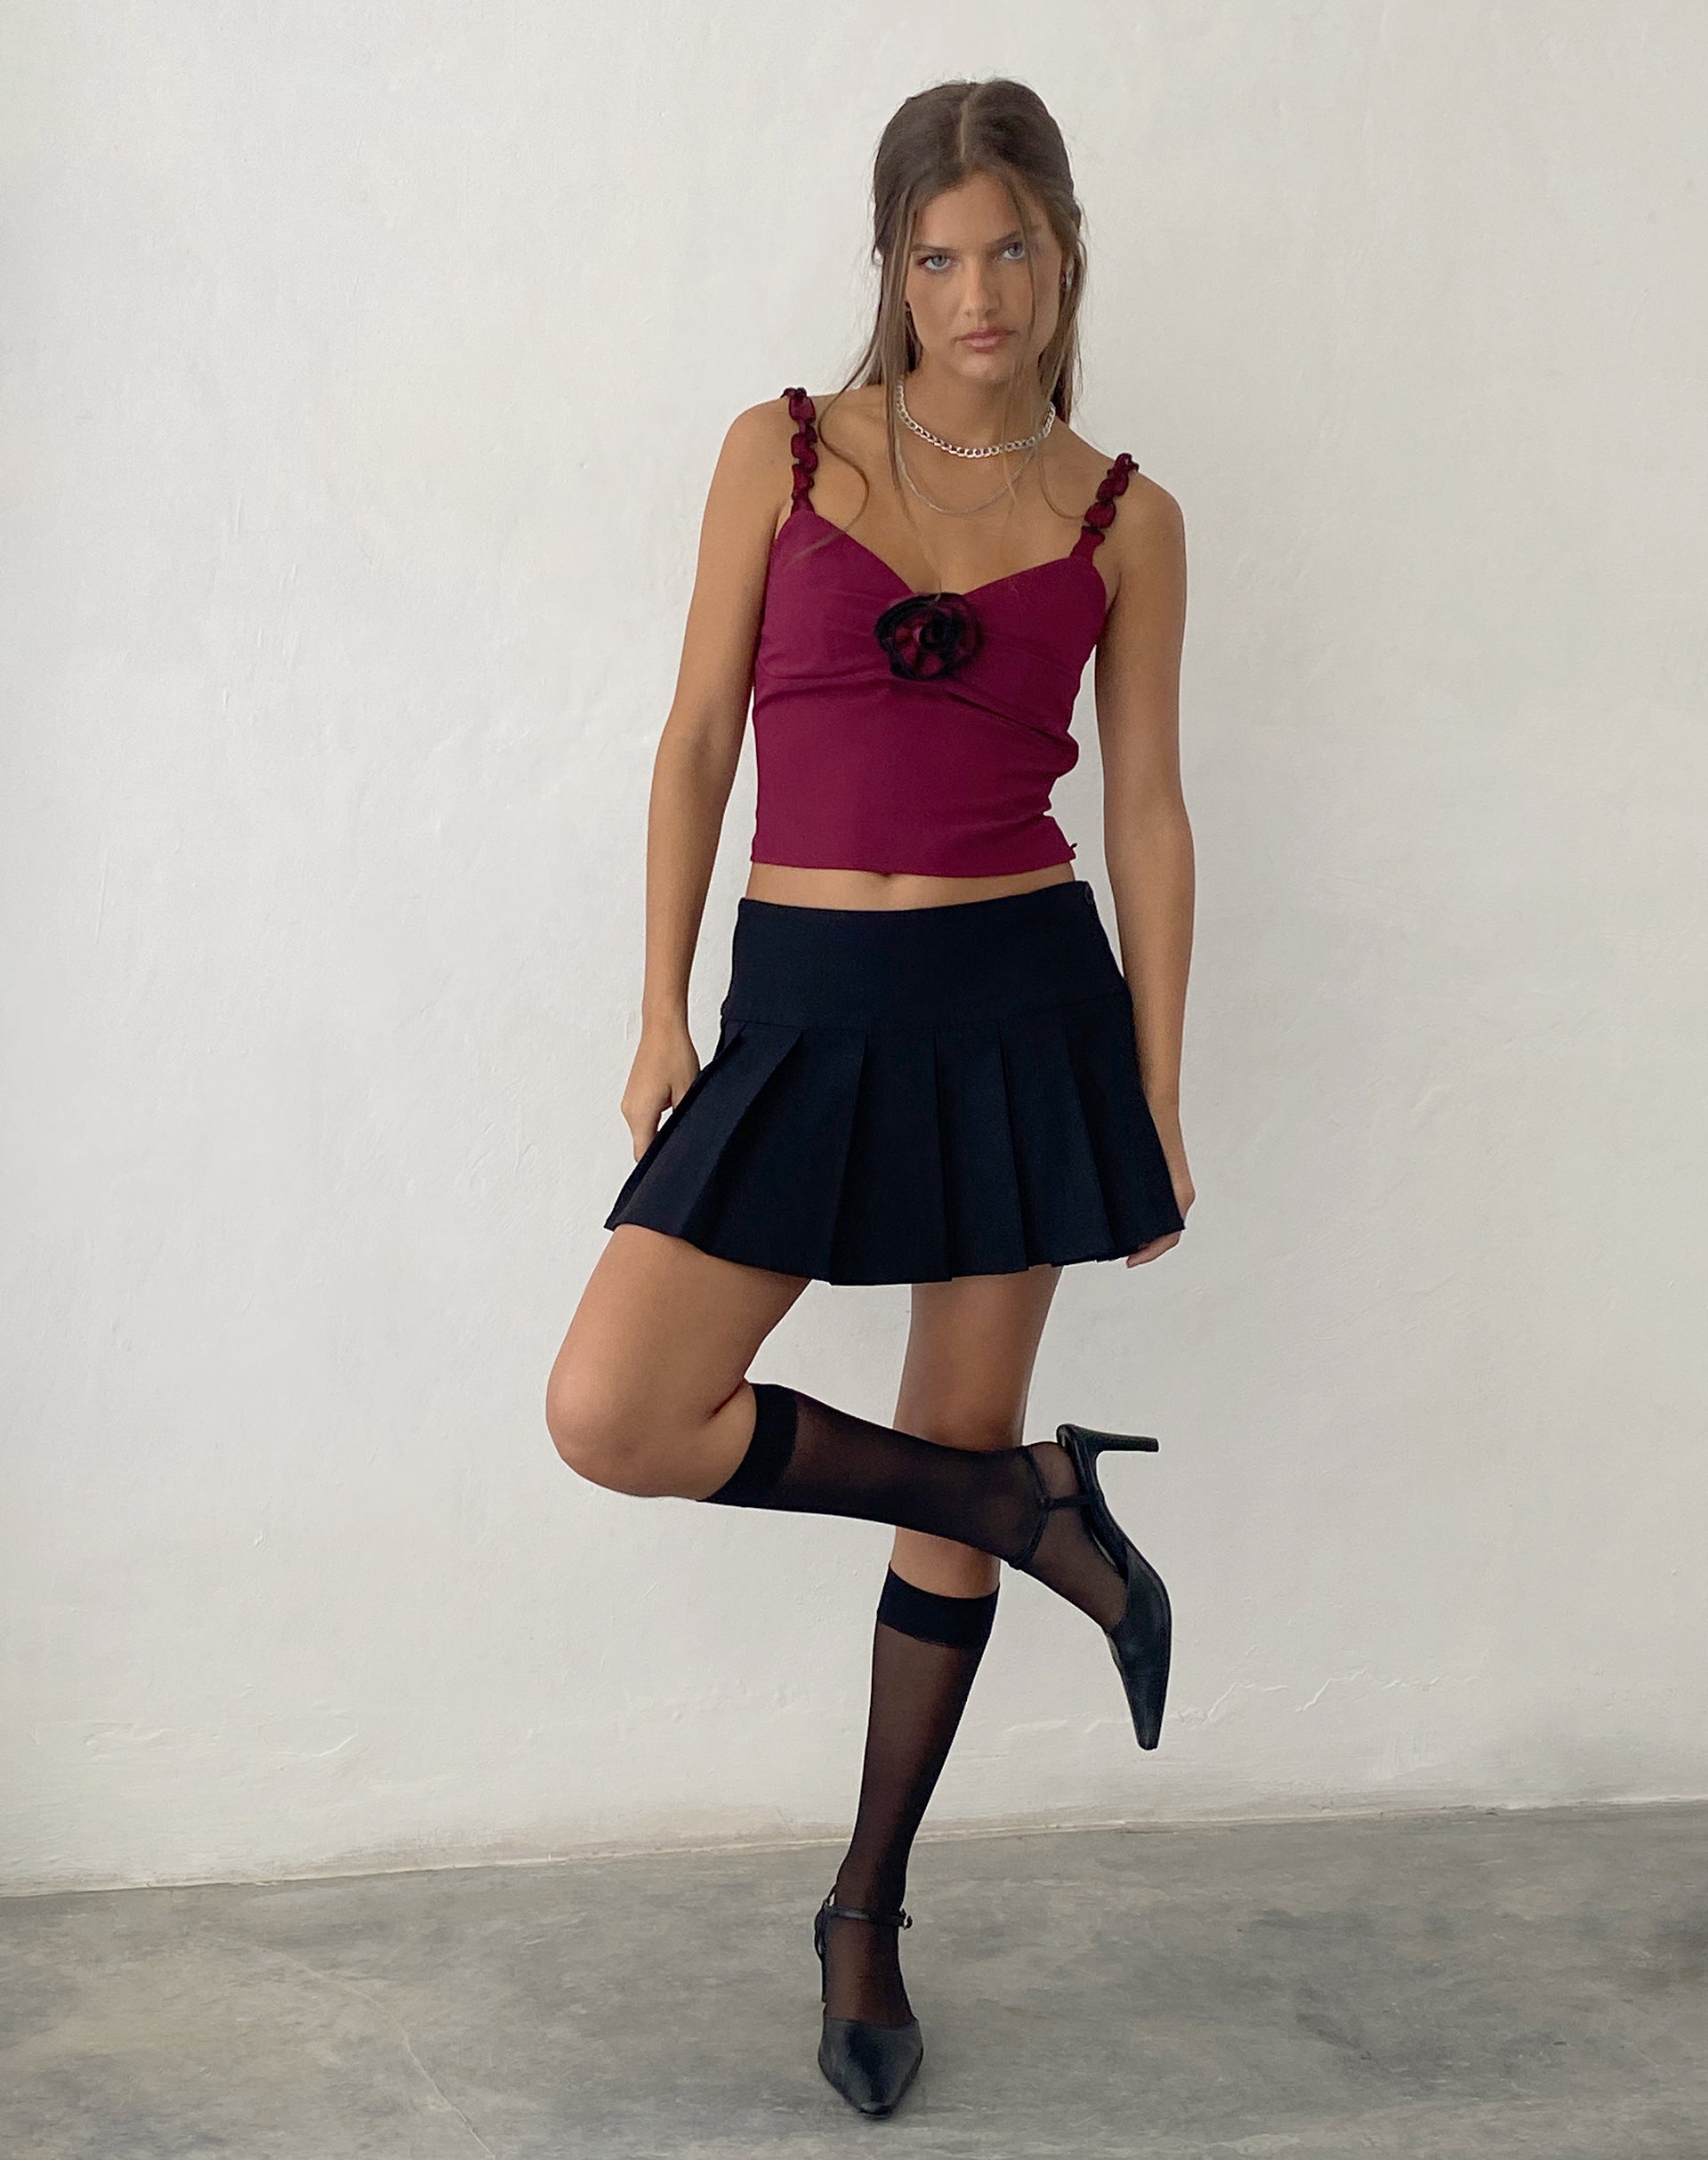 Image of Carini Cami Top in Burgundy with Rosette